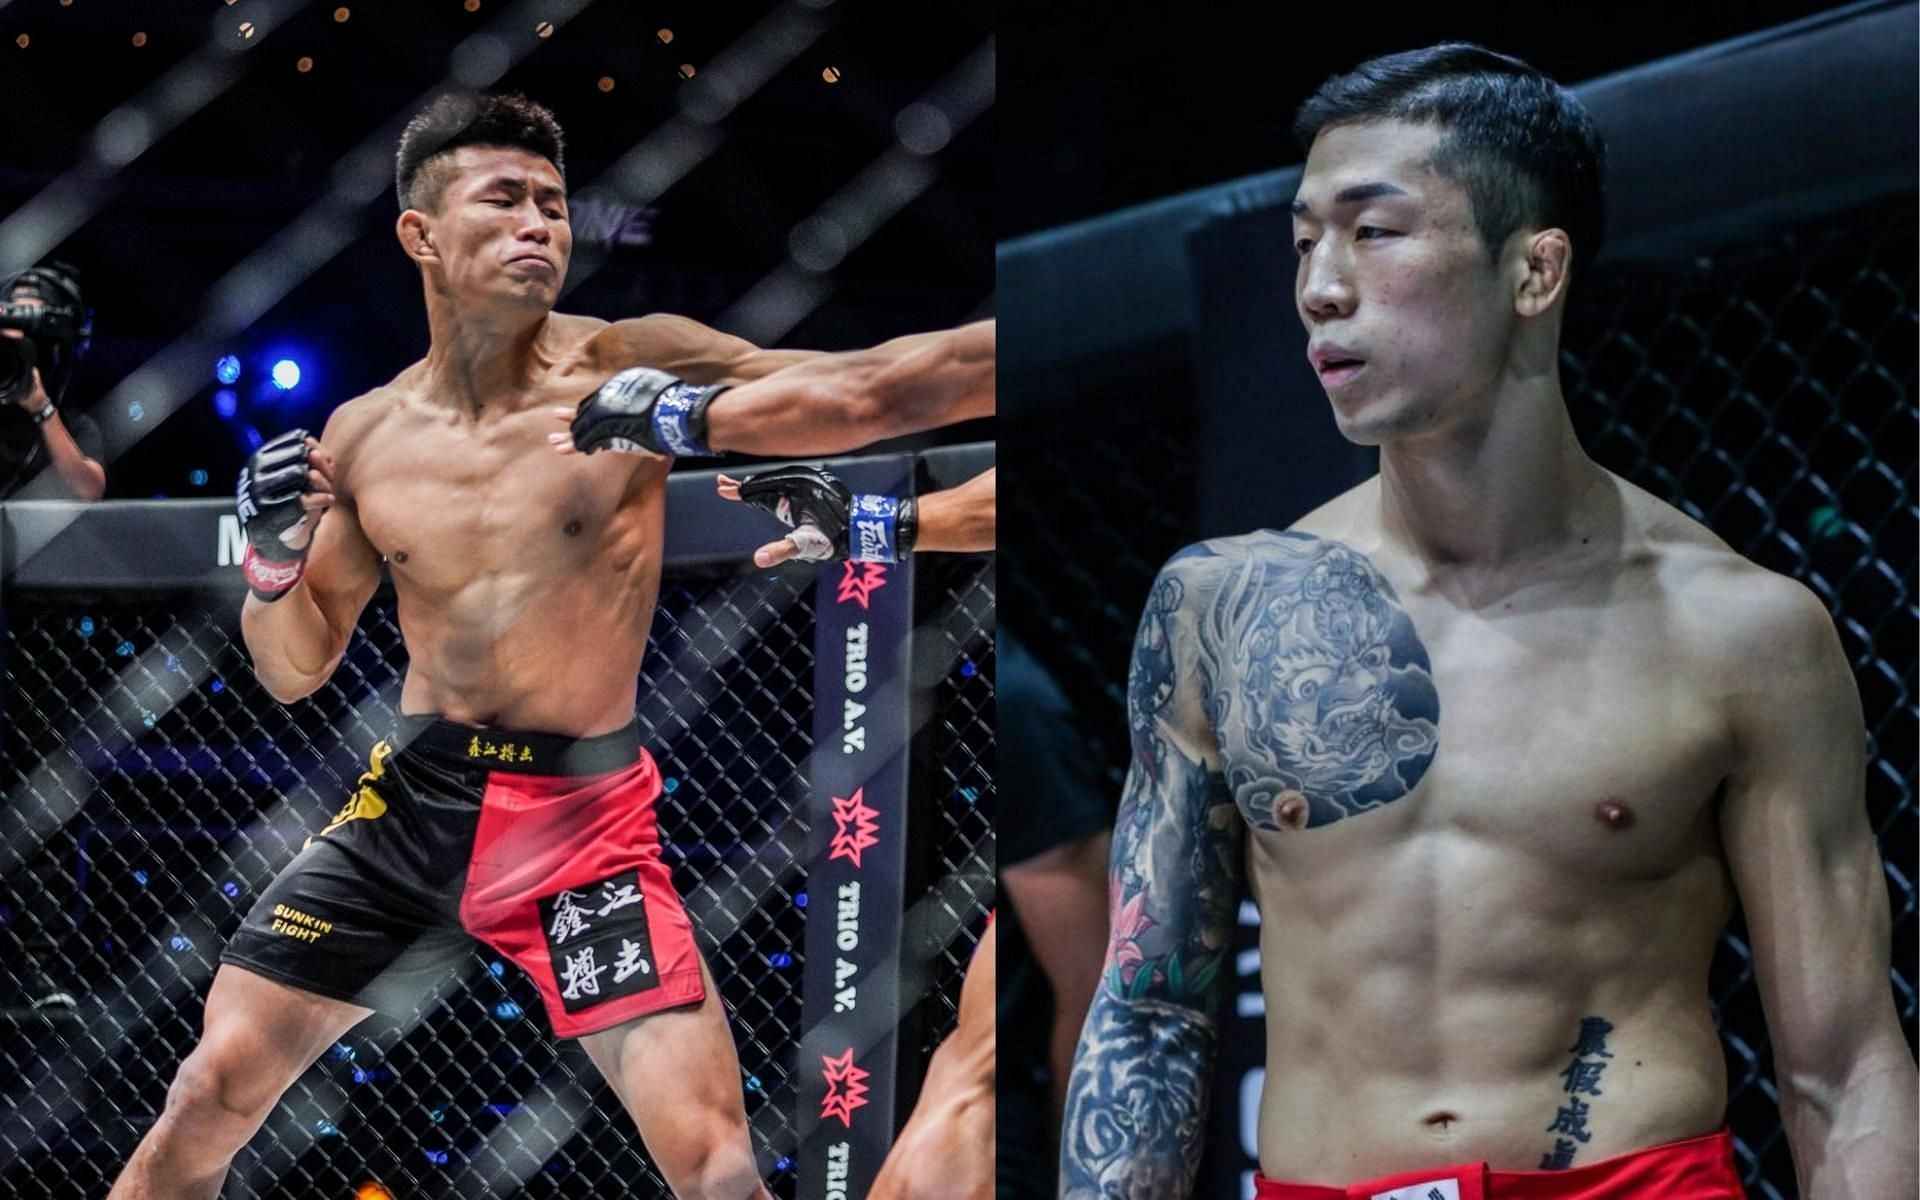 ONE Championship featherweight Tang Kai (left) and Kim Jae Woong (right) trade words ahead of their fight on January 28. (Images courtesy of ONE Championship)